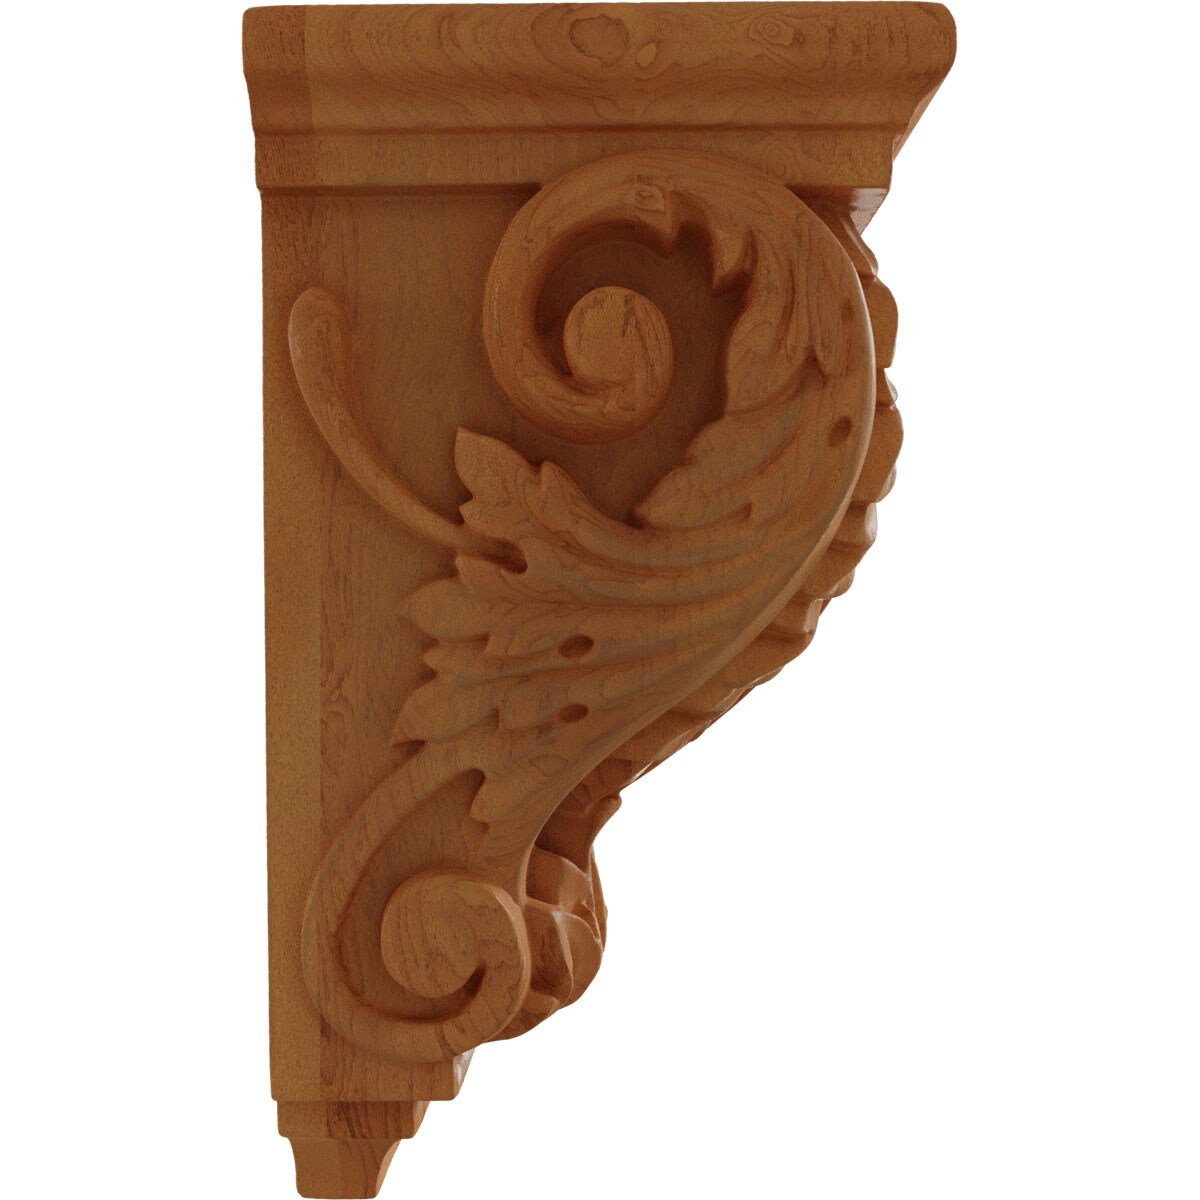 NEW !  SCROLL CARVED SOLID CHERRY WOOD CORBEL 3'' WIDE X 3'' DEEP X 6'' HIGH 